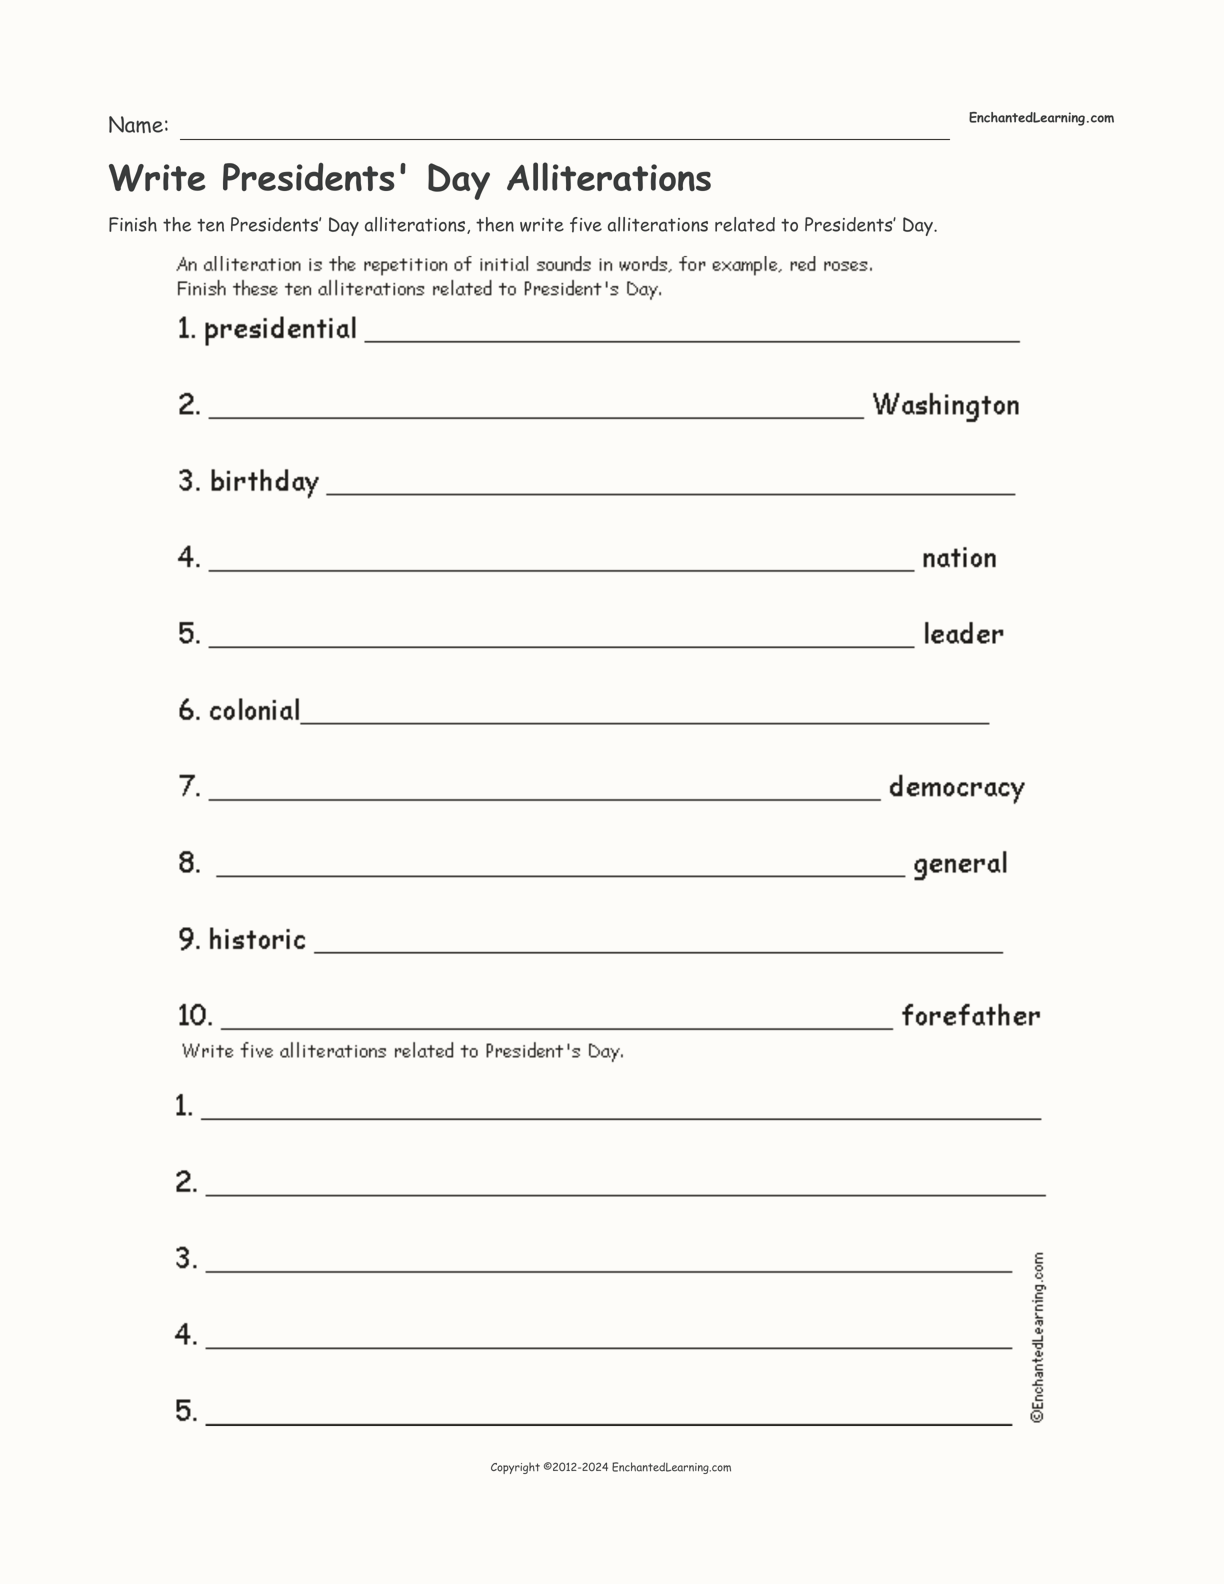 Write Presidents' Day Alliterations interactive printout page 1